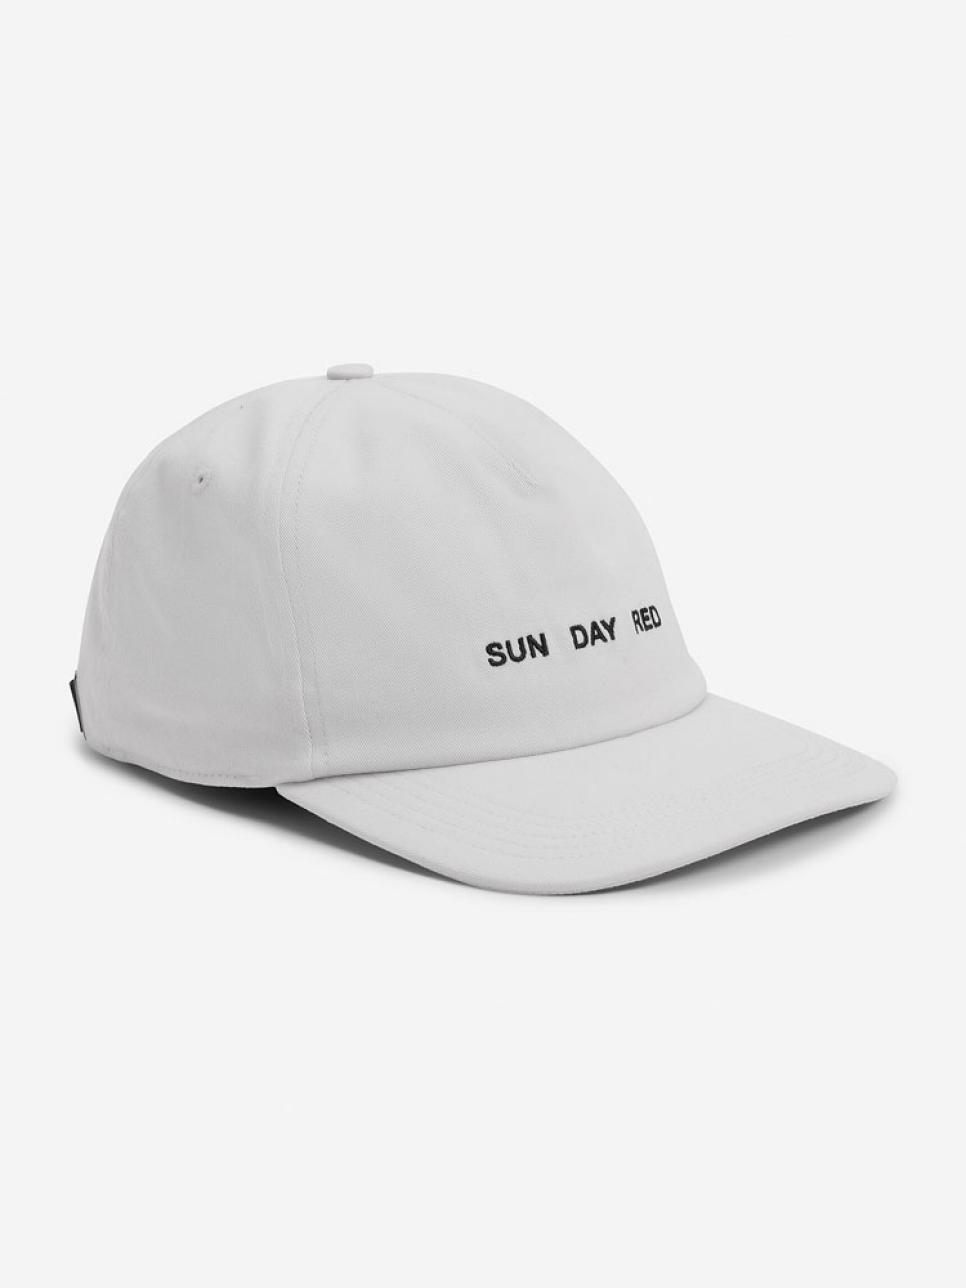 rx-ssun-day-red-perforated-snapback-hat.jpeg